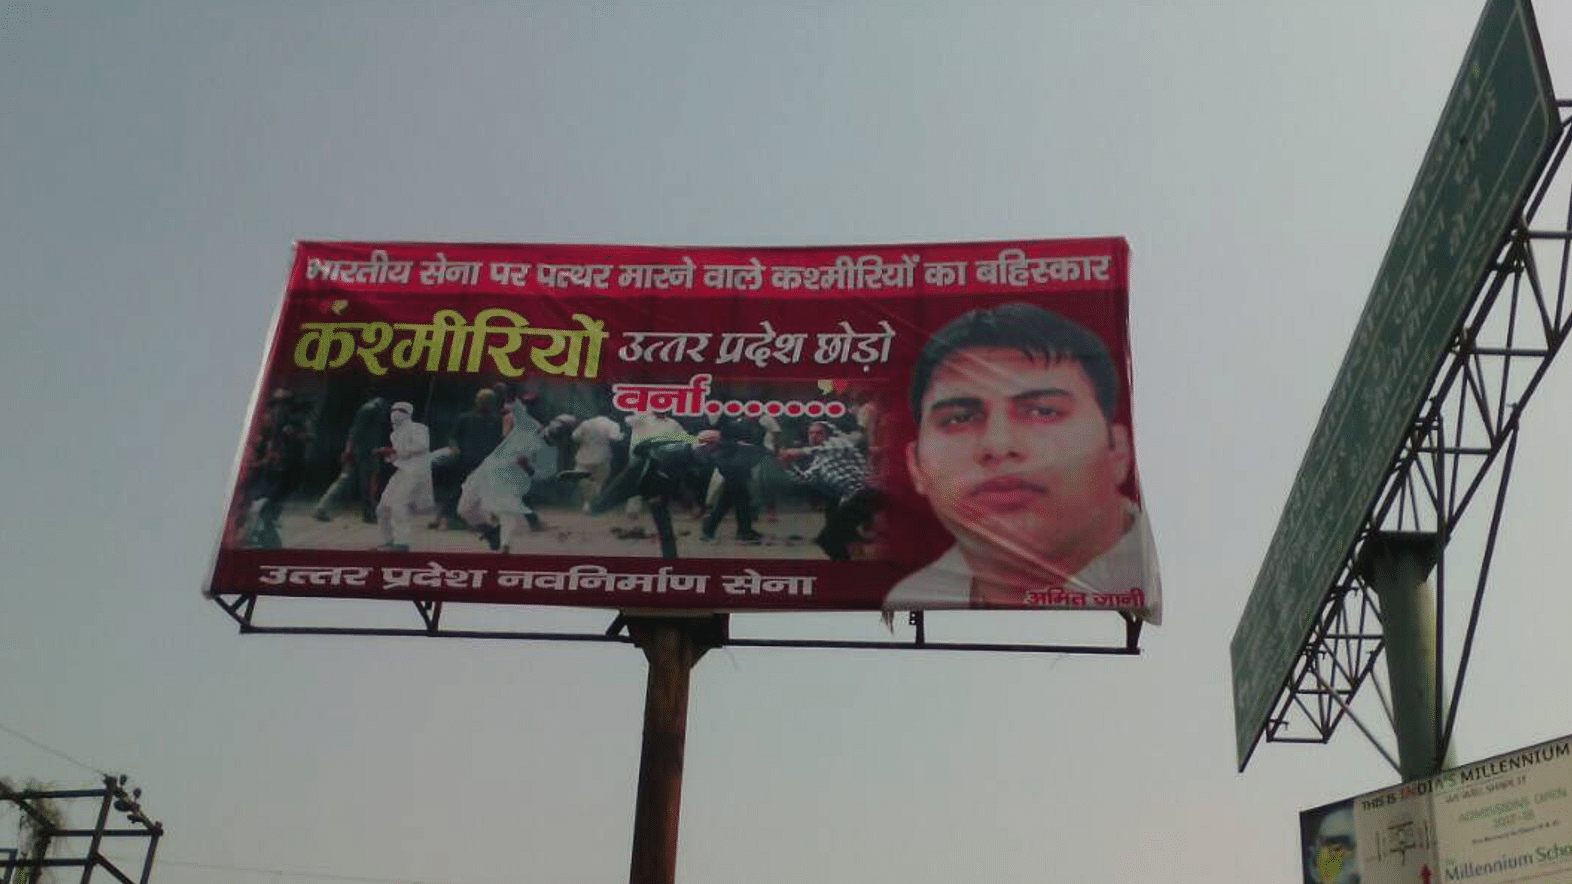  The hoardings ask Kashmiris to leave the state or “face consequences”. (Photo Courtesy: Twitter/@<a href="https://twitter.com/IshitaBhatiaTOI">Ishita Bhatia‏</a>)  